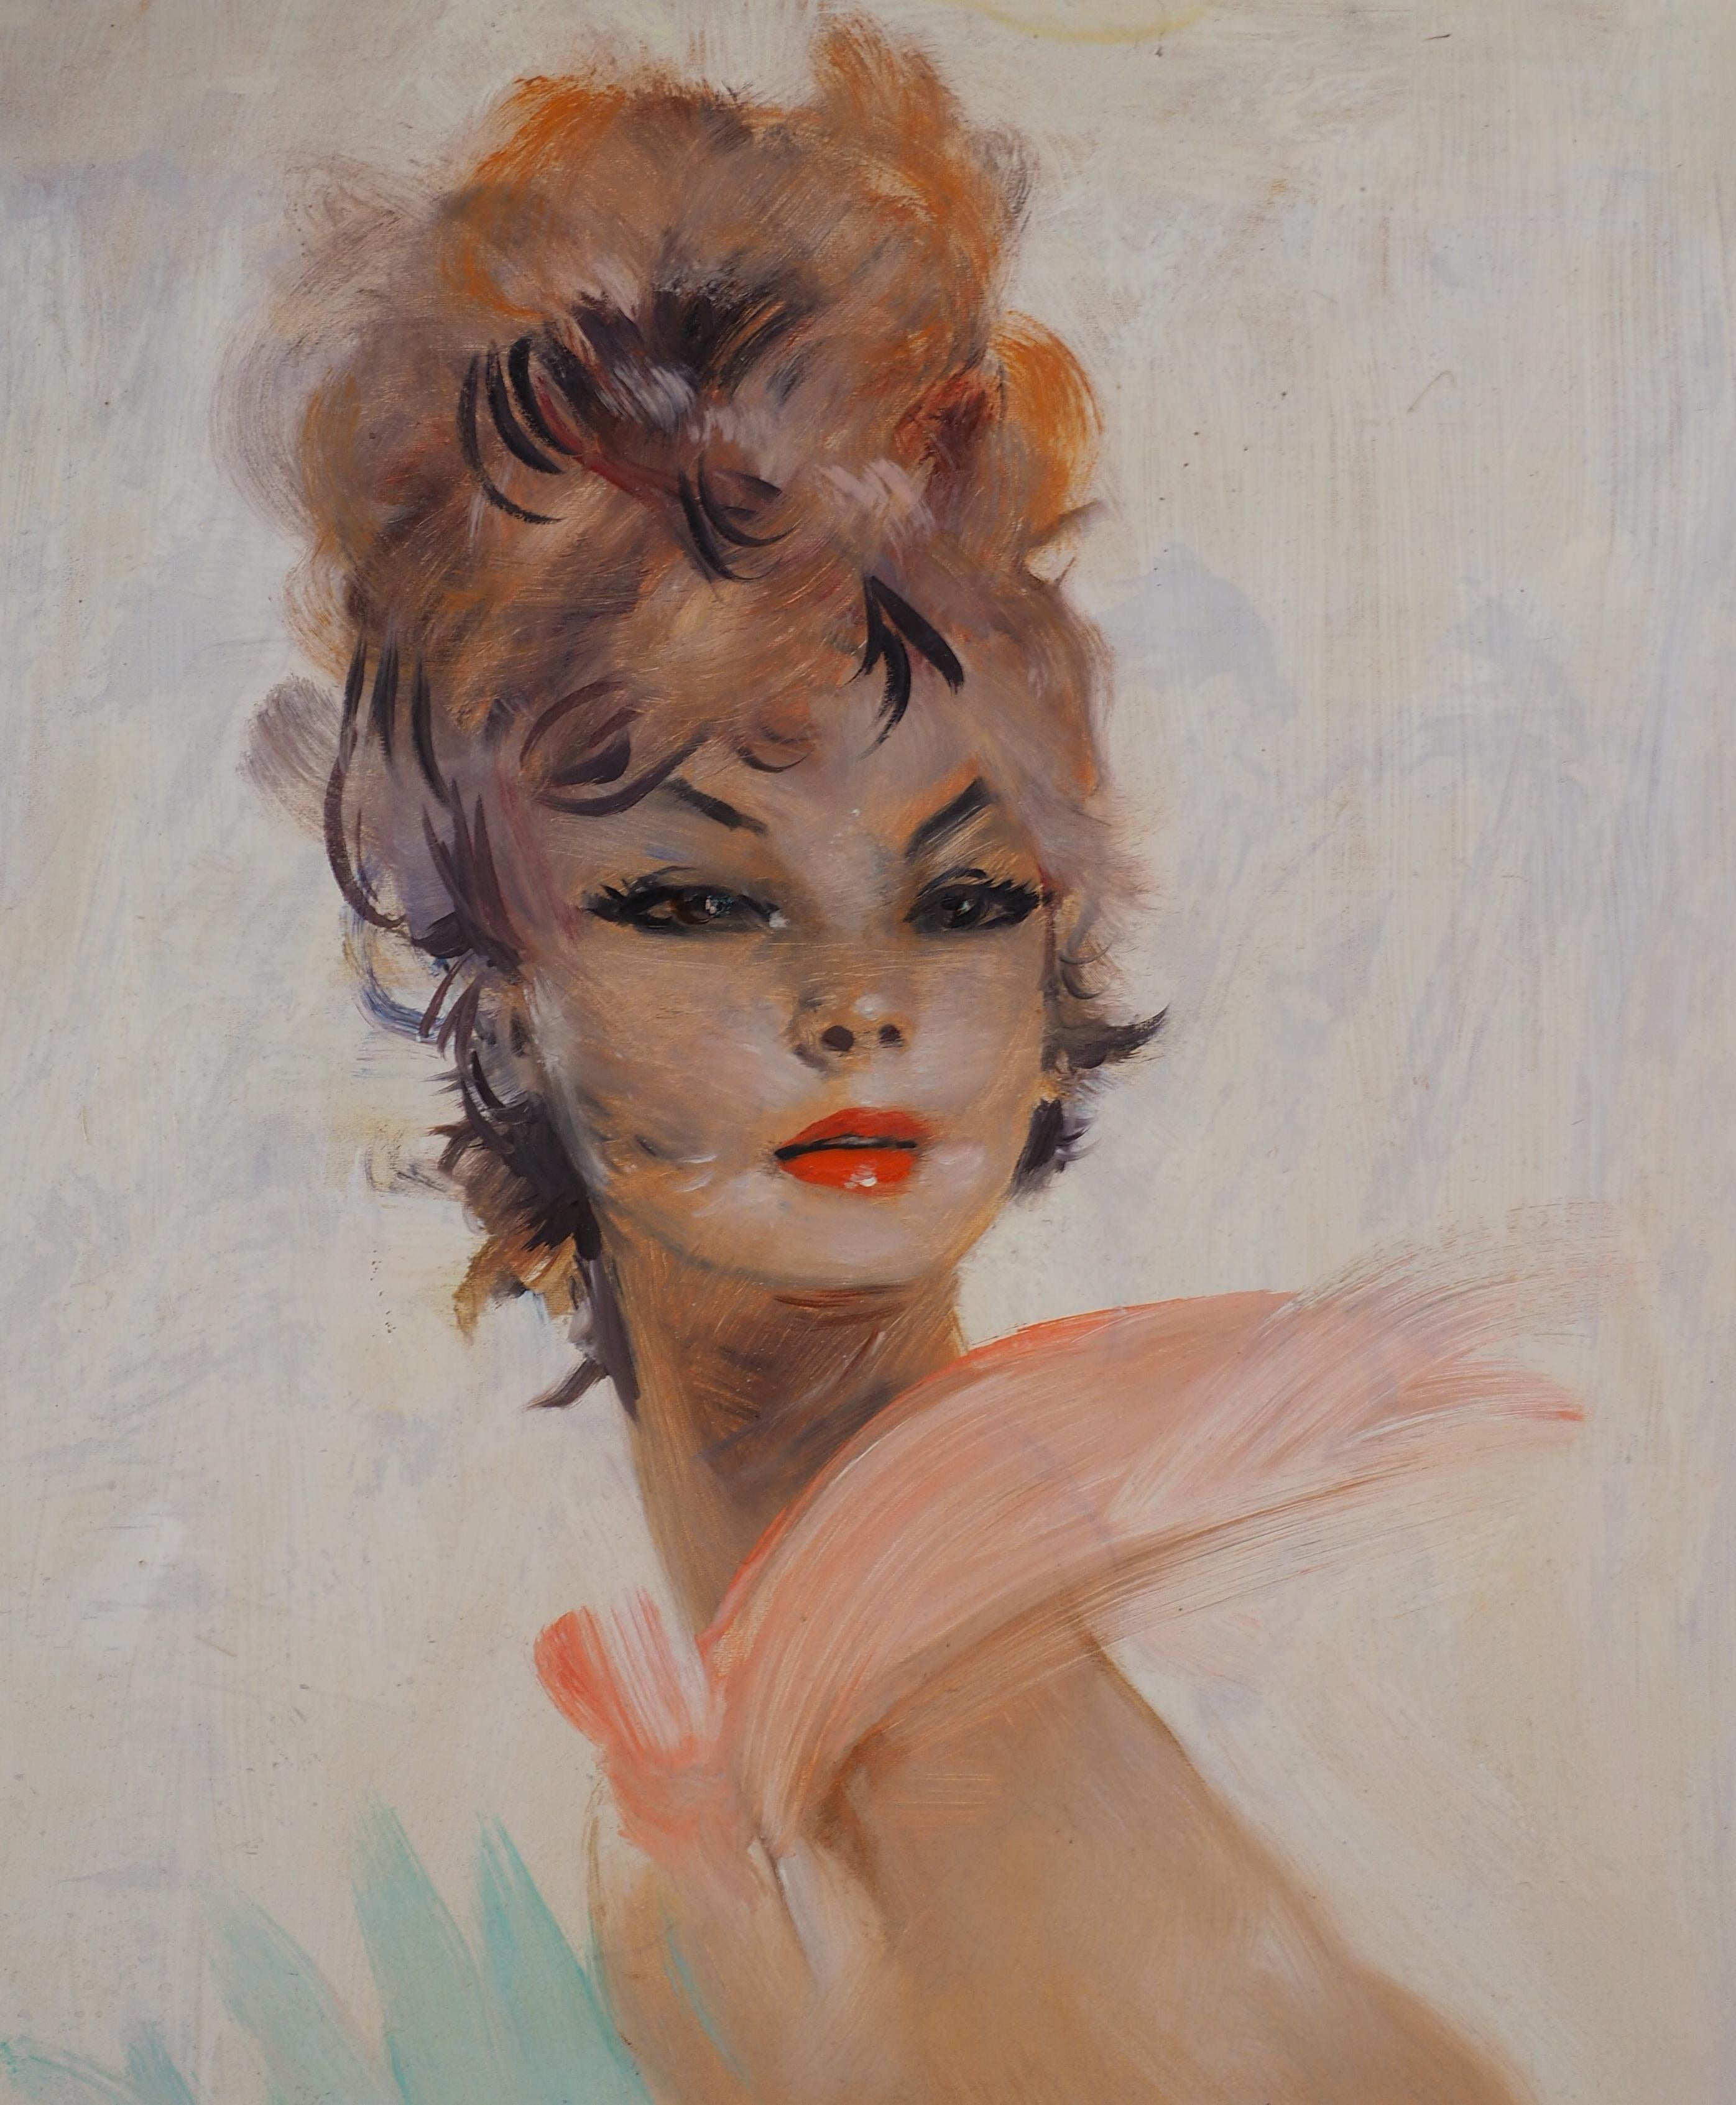 Jean-Gabriel DOMERGUE (1889-1962)
Woman with Ruban 

Original oil painting on panel
Signed bottom left
On panel 46 x 38 cm (c. 18.1 x 14.9 inch) 
Presented in nice vintage golden wood frame 68 x 60 cm  (c. 15 x 13 inches)

Excellent condition